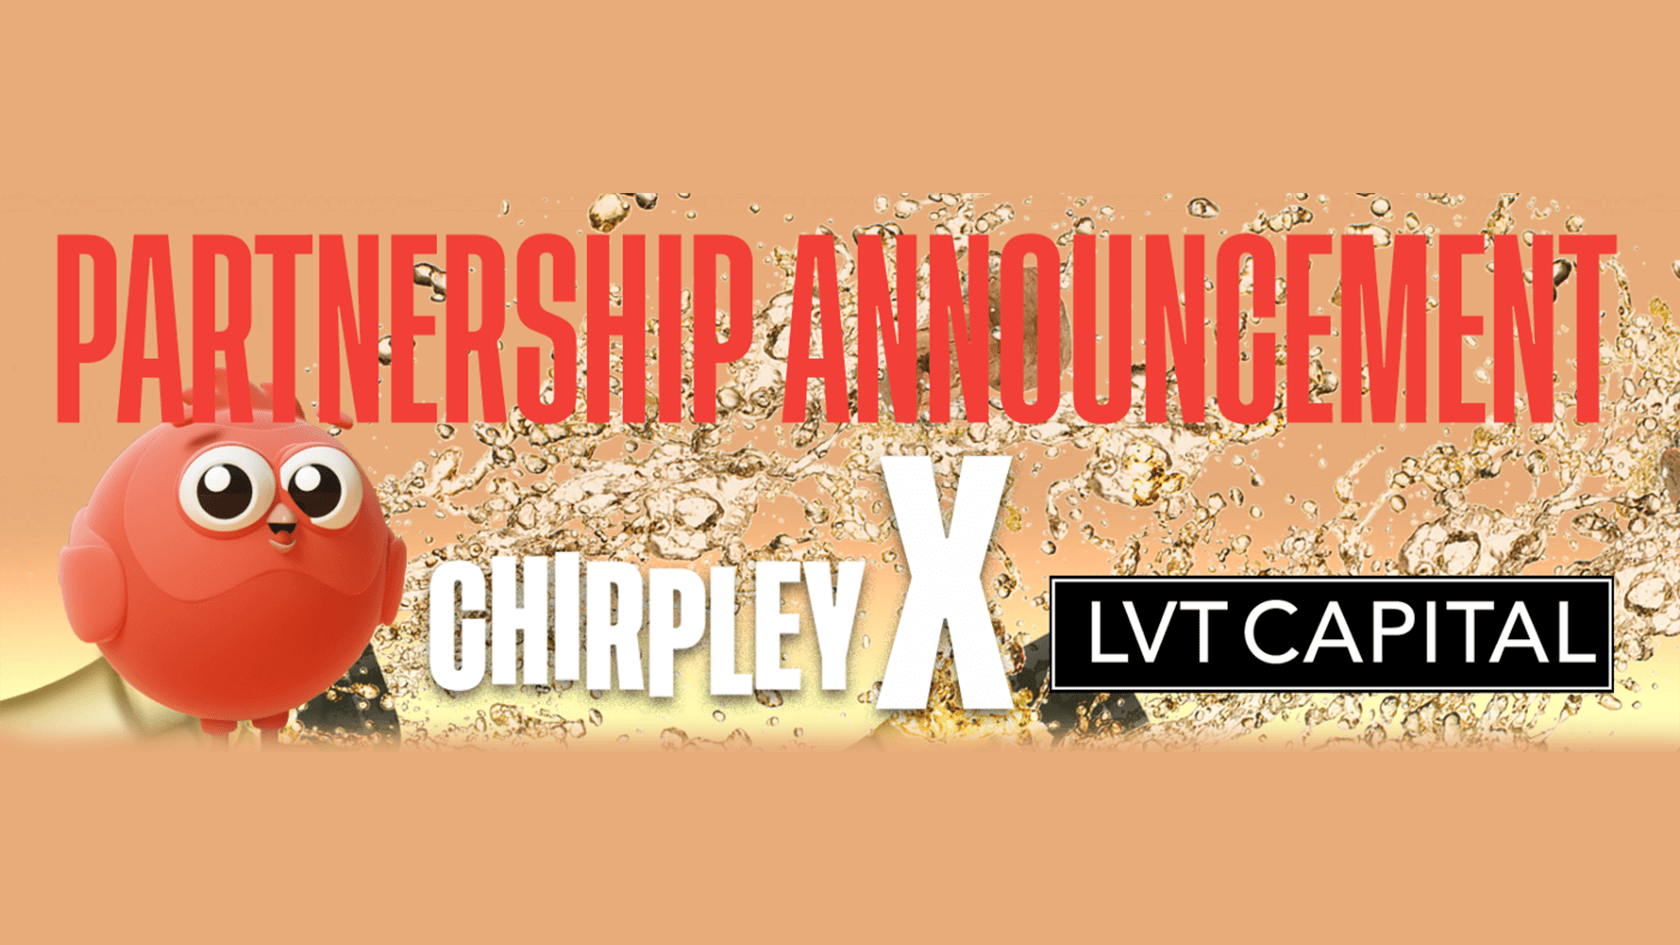 Partnership Announcement: Chirpley and LVT Capital